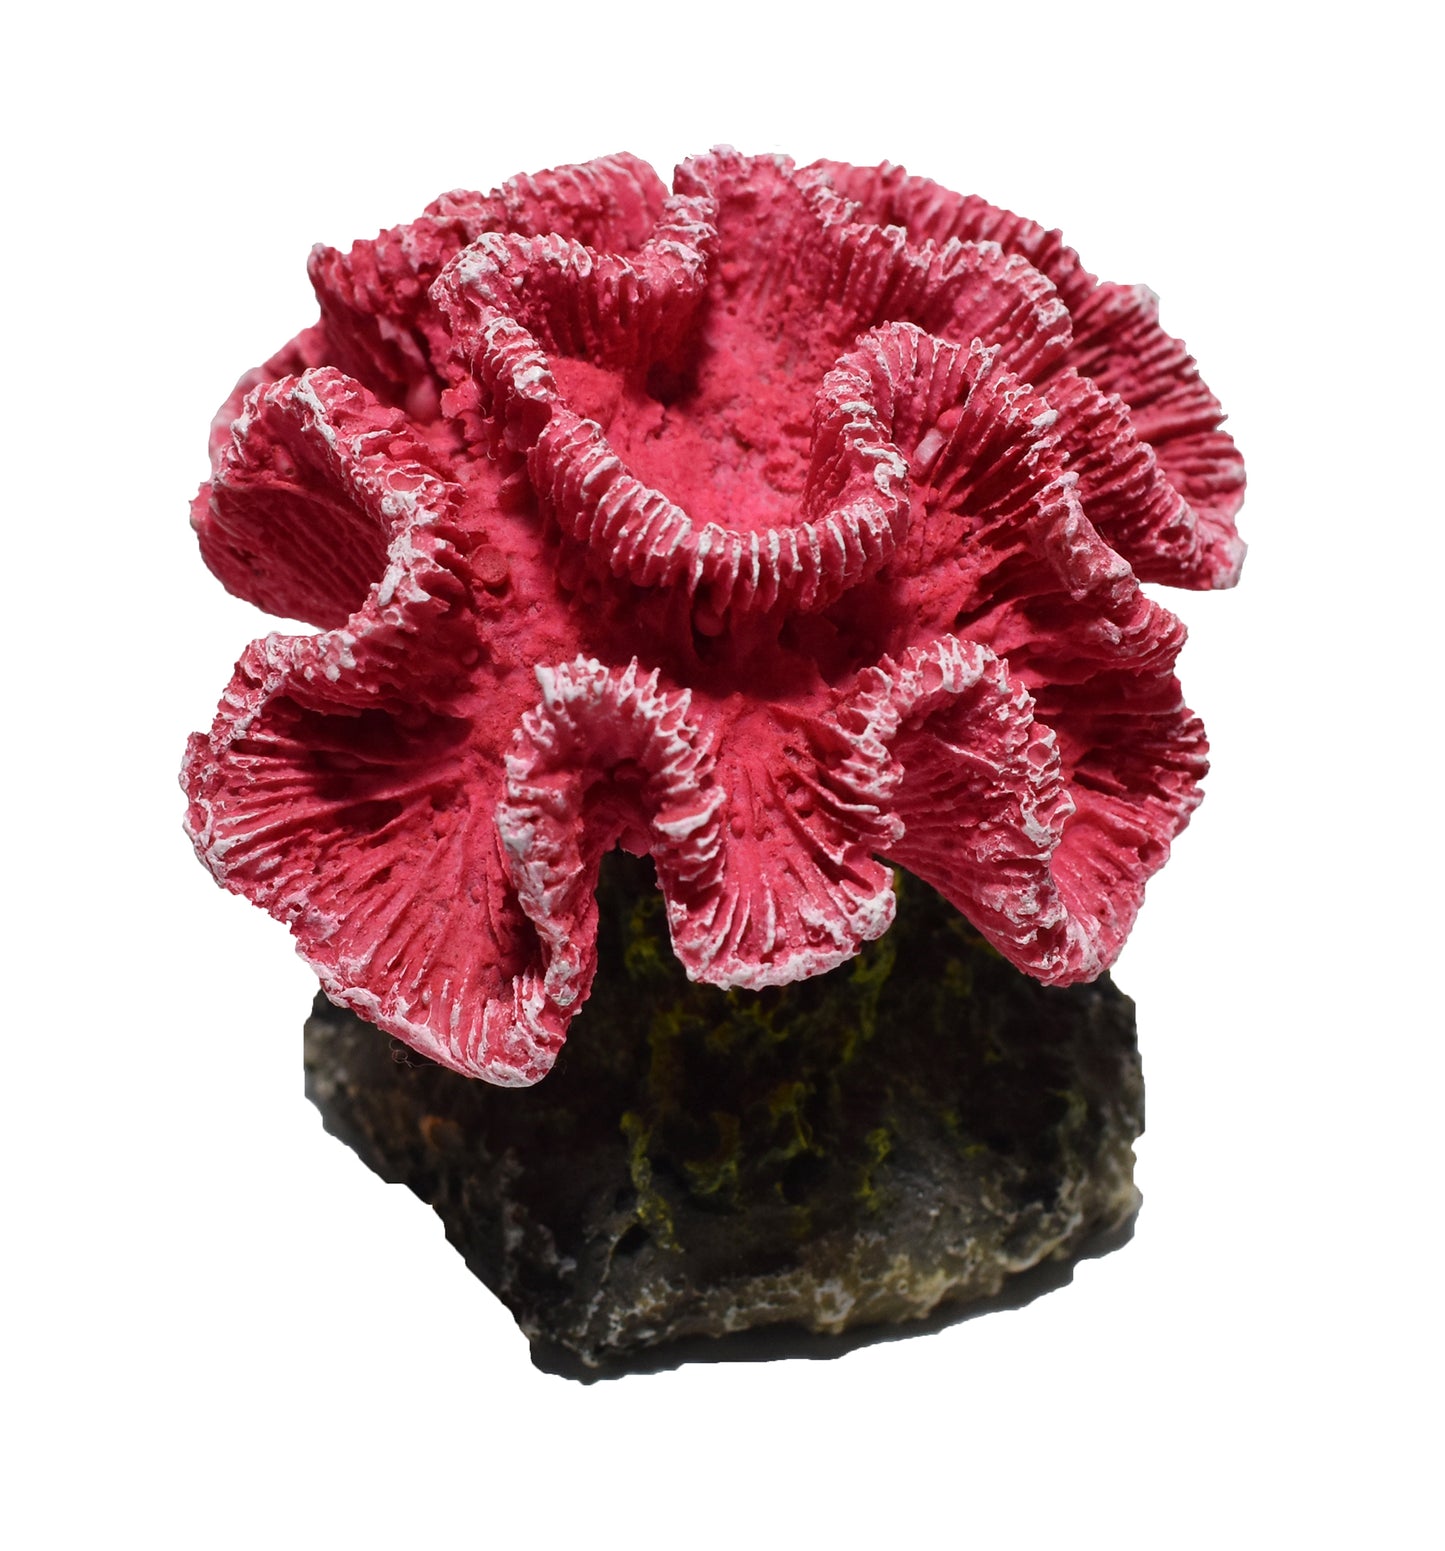 2.9" Pink Coral Resin Ornament - Map Price $7.99